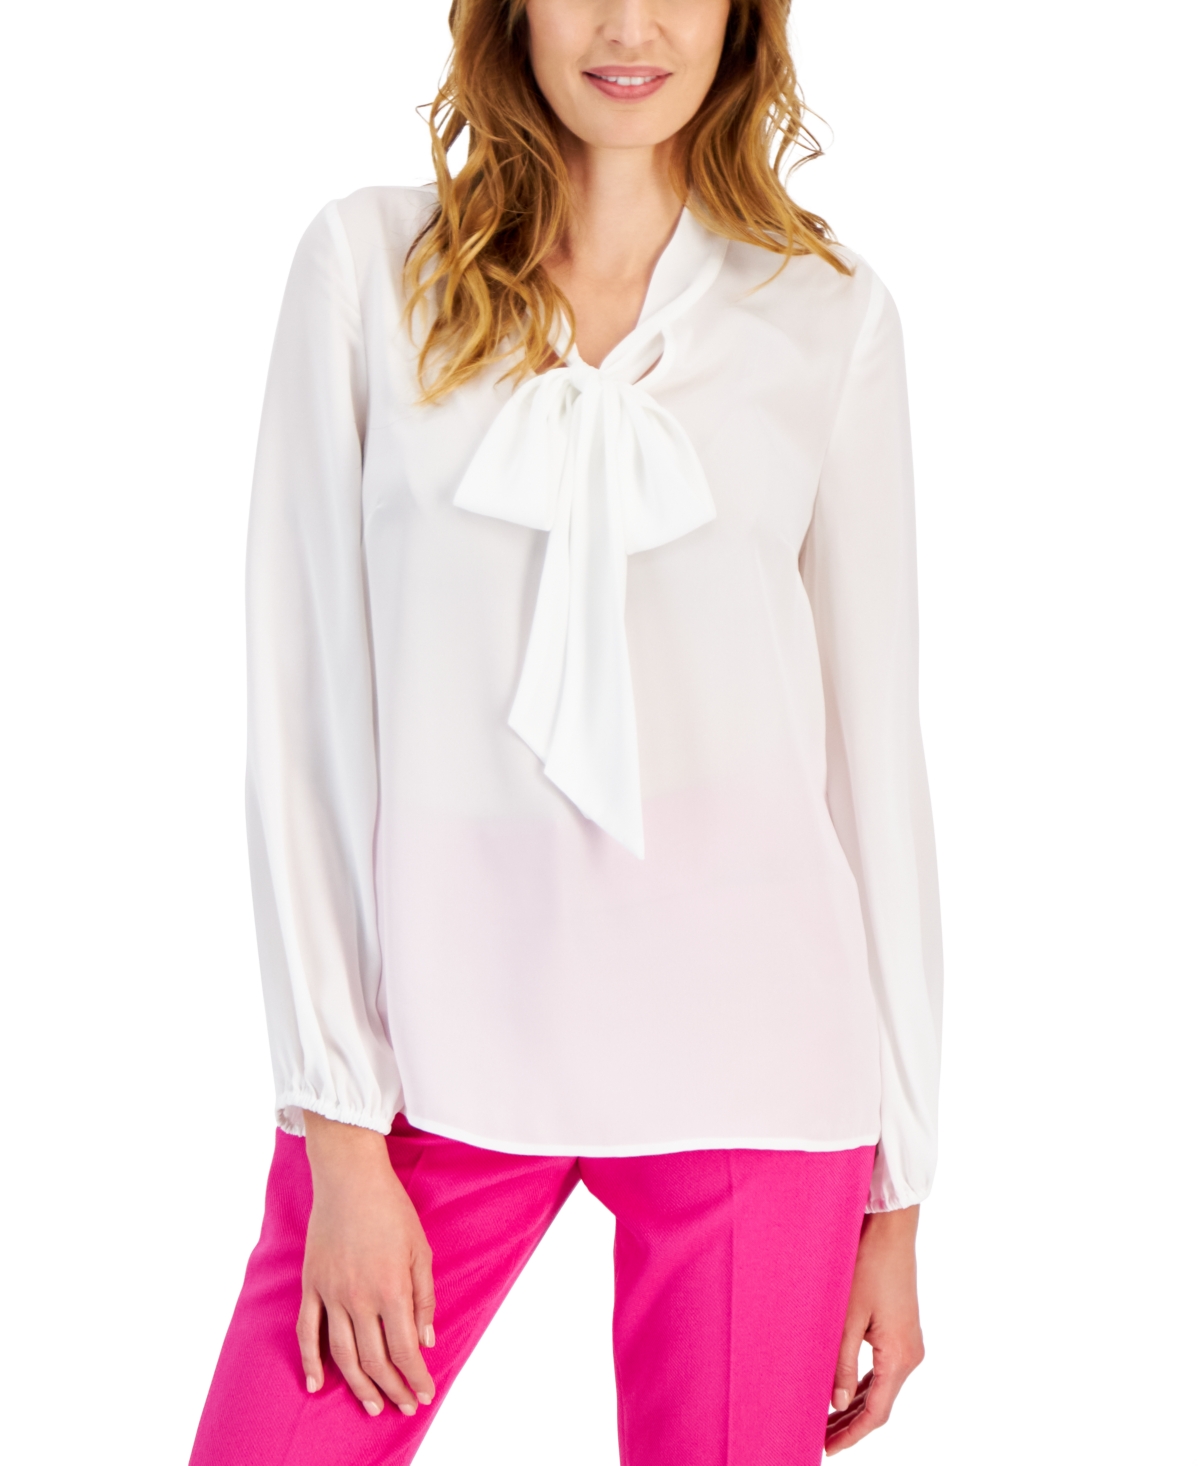 Women's Bow Neck Long Sleeve Top - Ivory